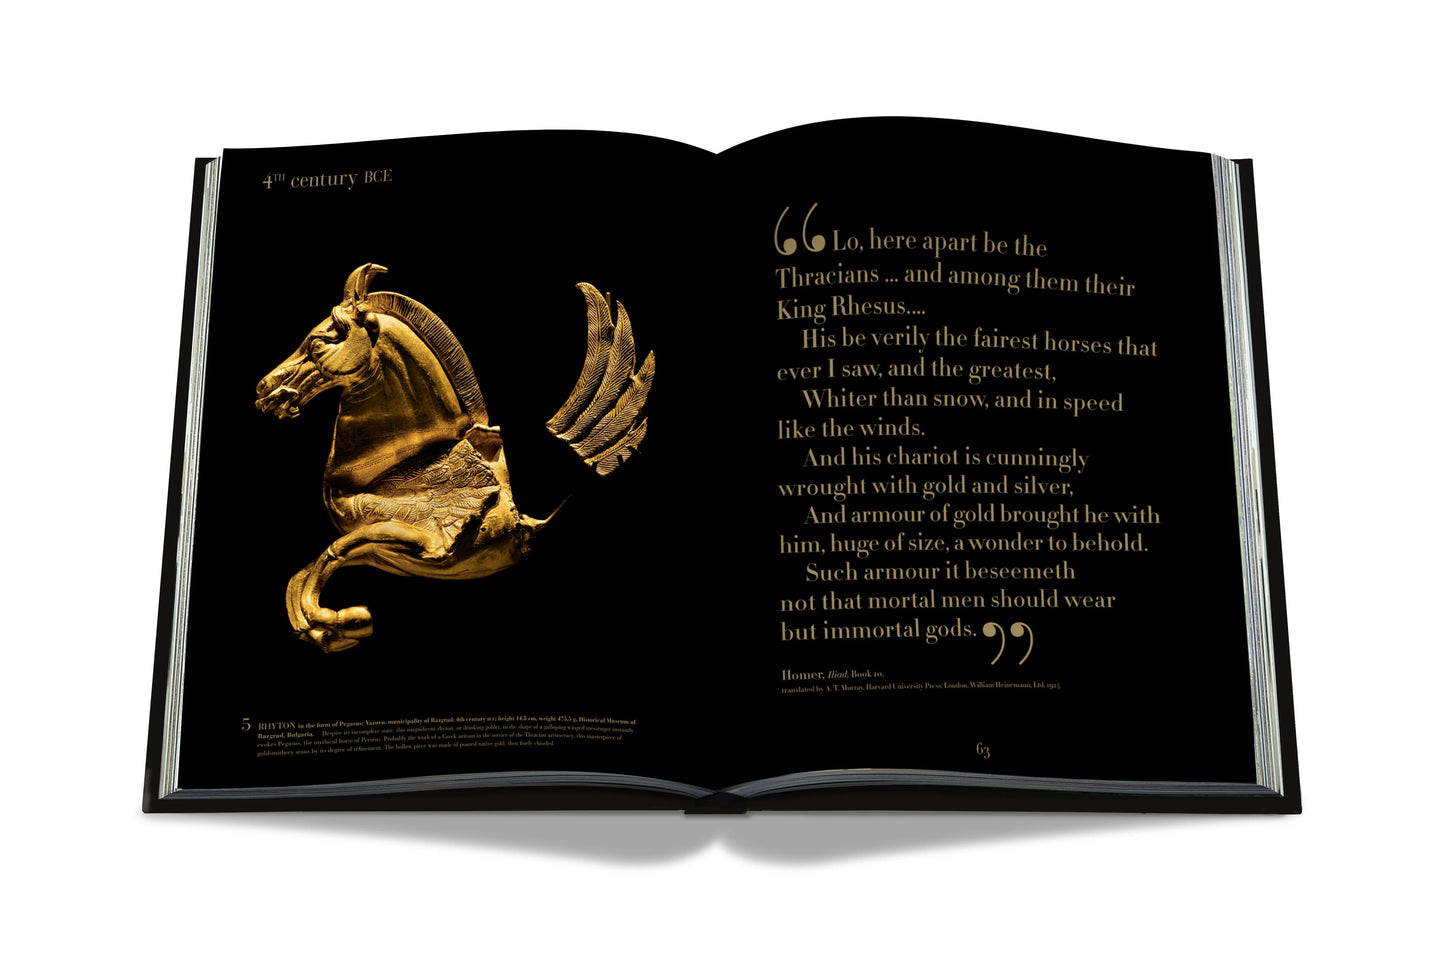 Gold Book: Impossible Collection (Special Edition)